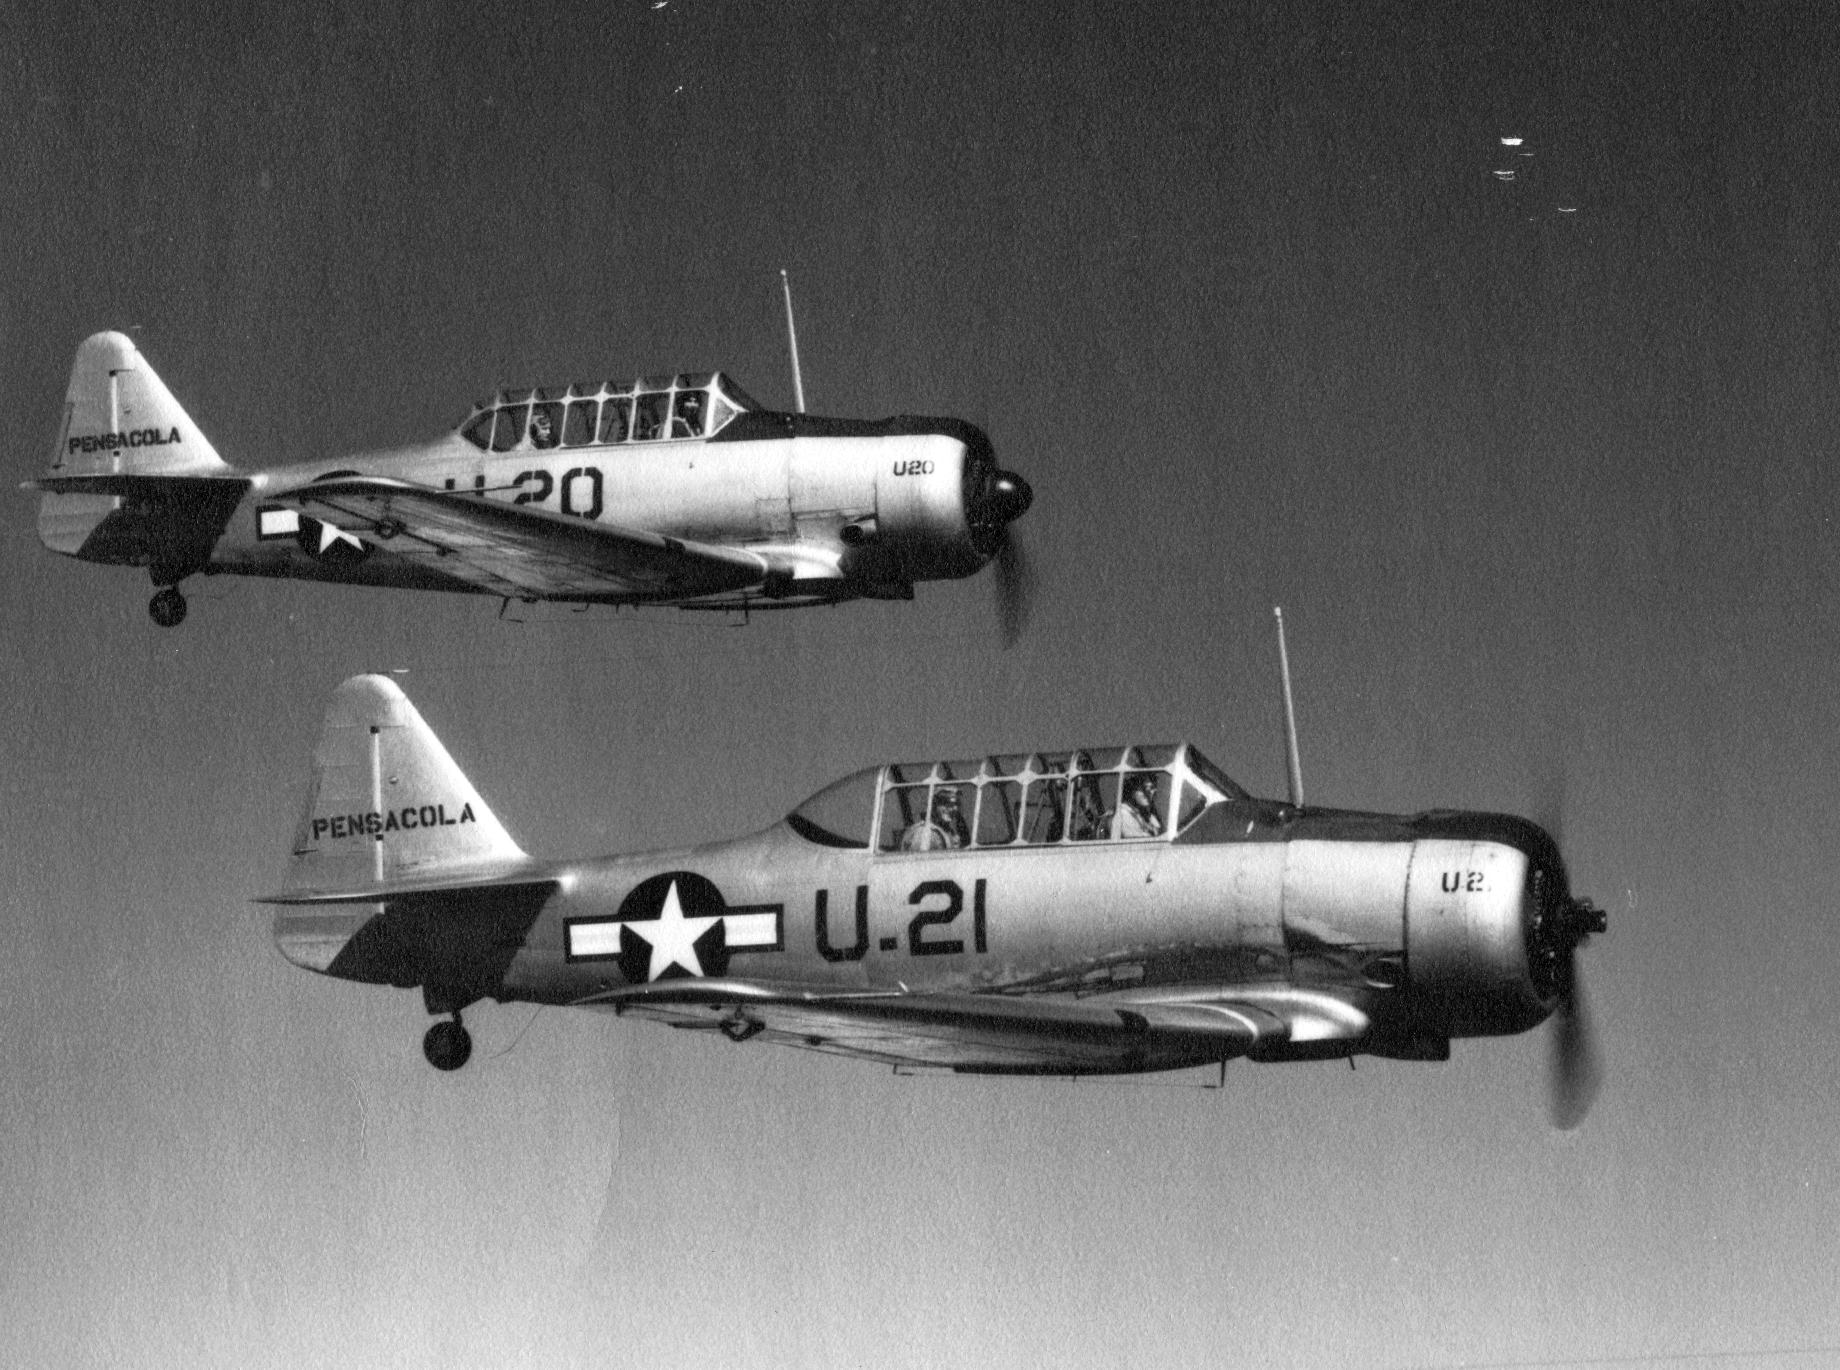 North American SNJ 6 in front and SNJ 5 in rear